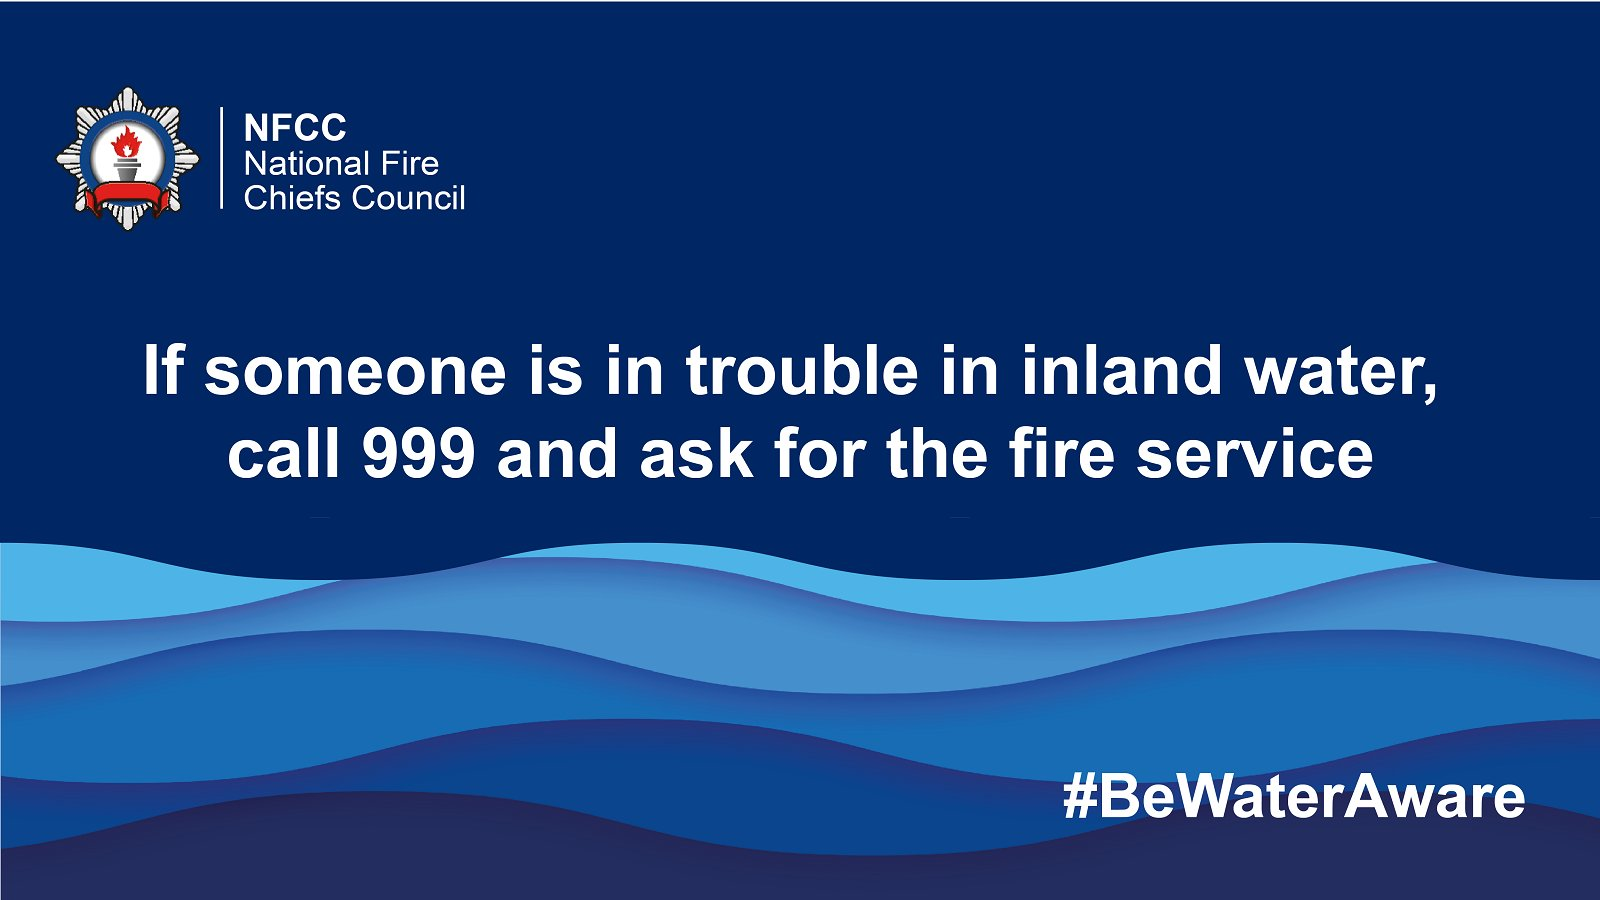 If someone is in trouble in water call fire service